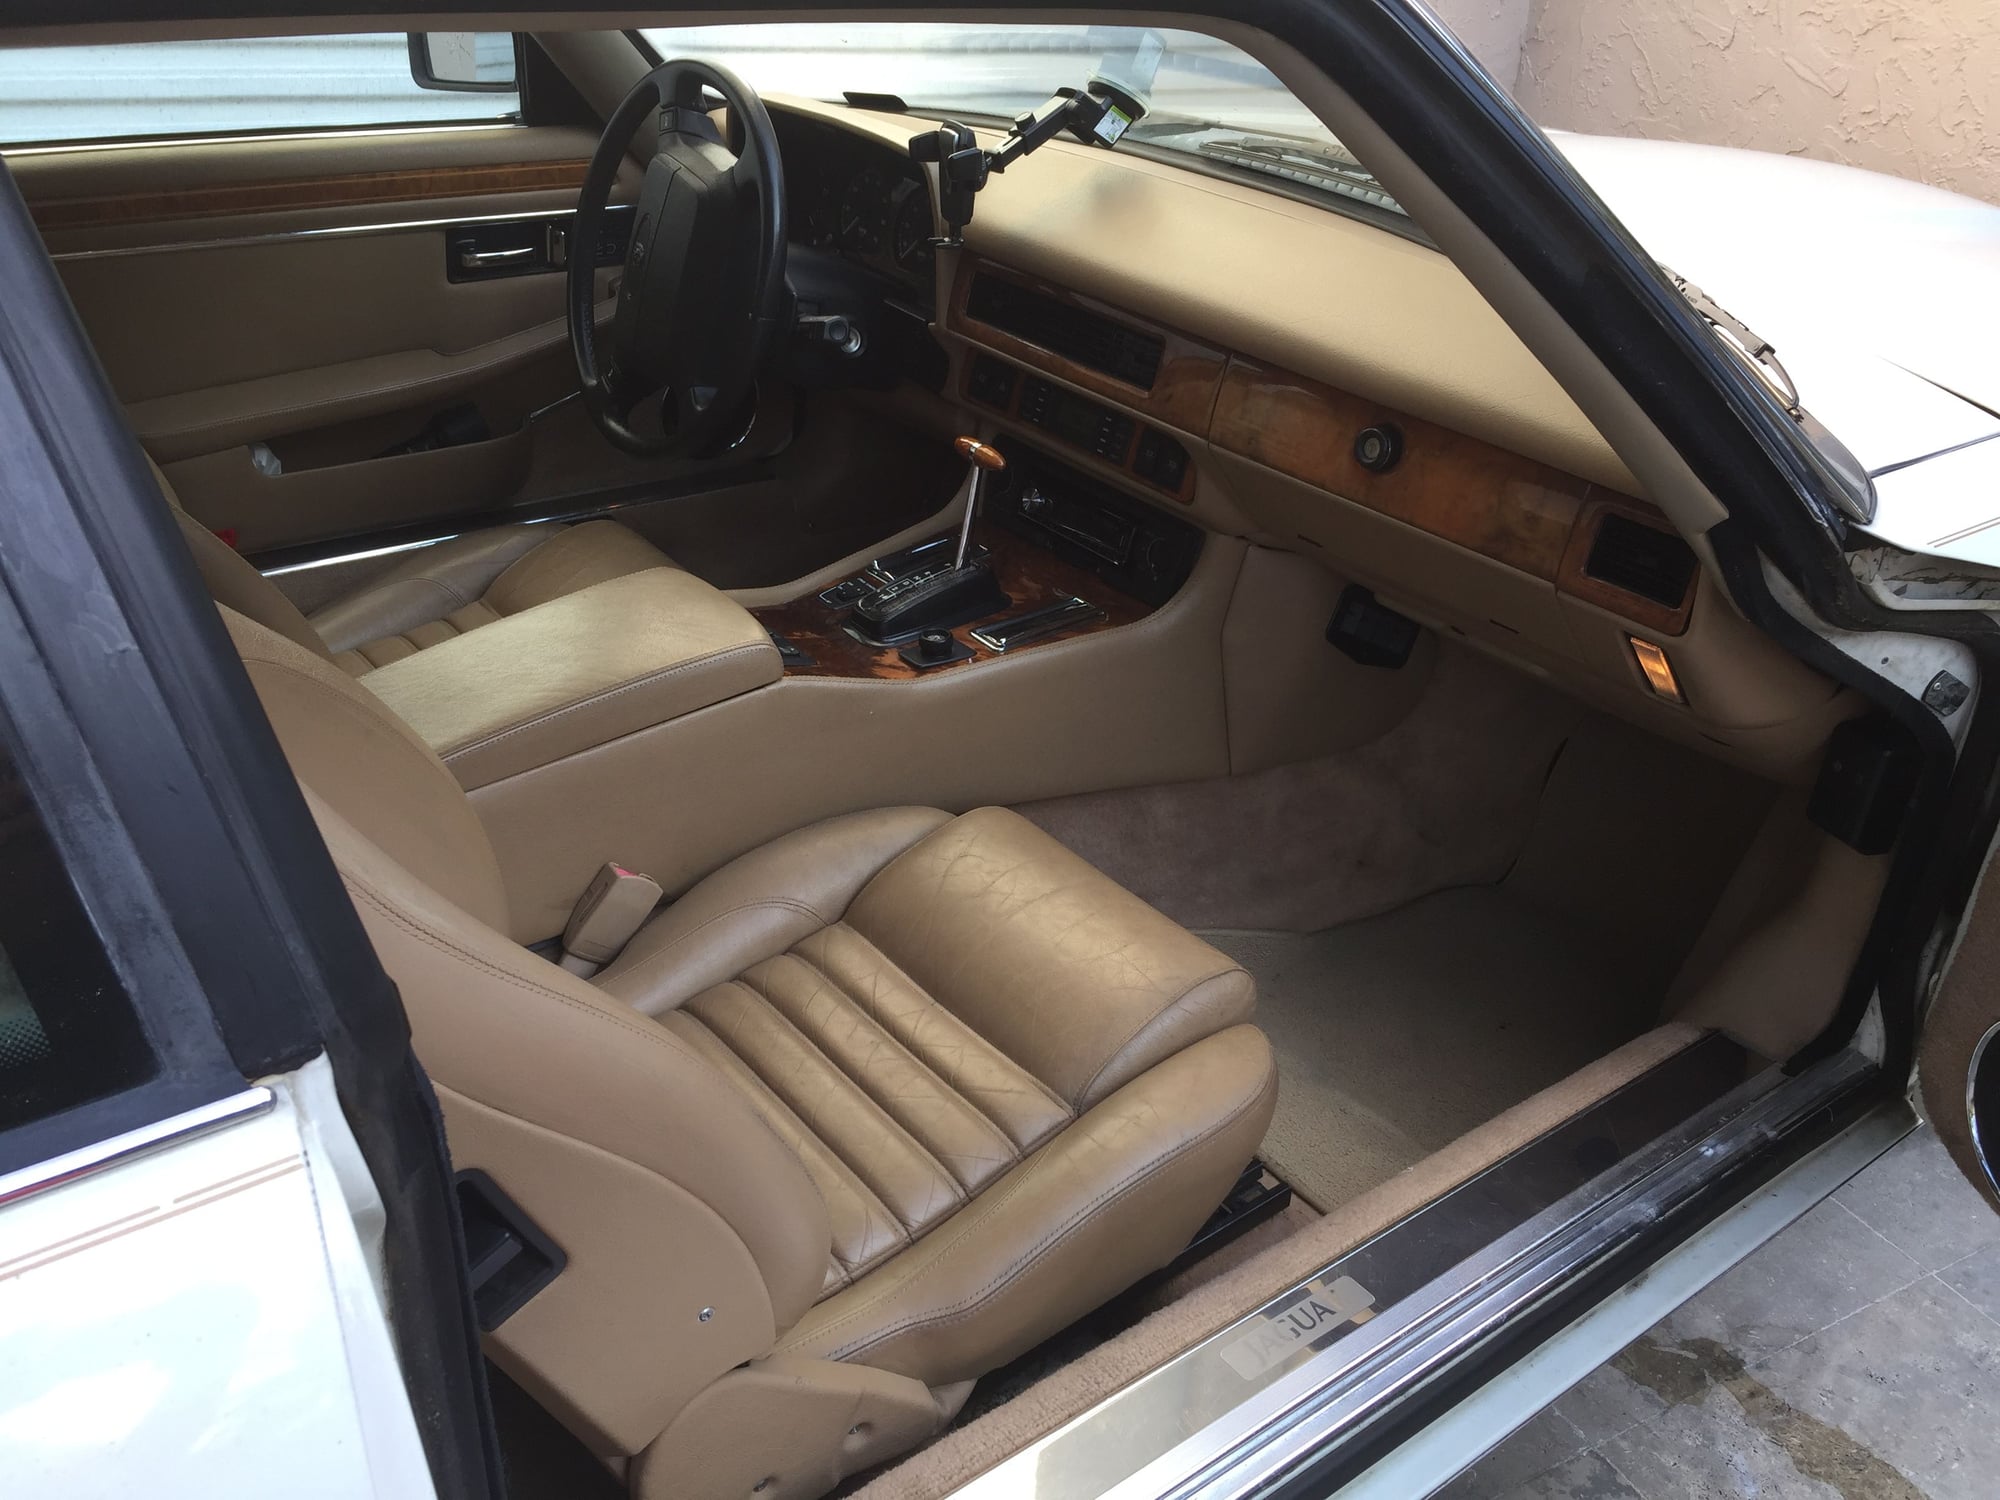 1992 Jaguar XJS - 1992 Jaguar XJS V12 Coupe with 56,000 miles - Used - VIN SAJNW5846NC182111 - 56,000 Miles - 12 cyl - 2WD - Automatic - Coupe - White - South Miami, FL 33143, United States